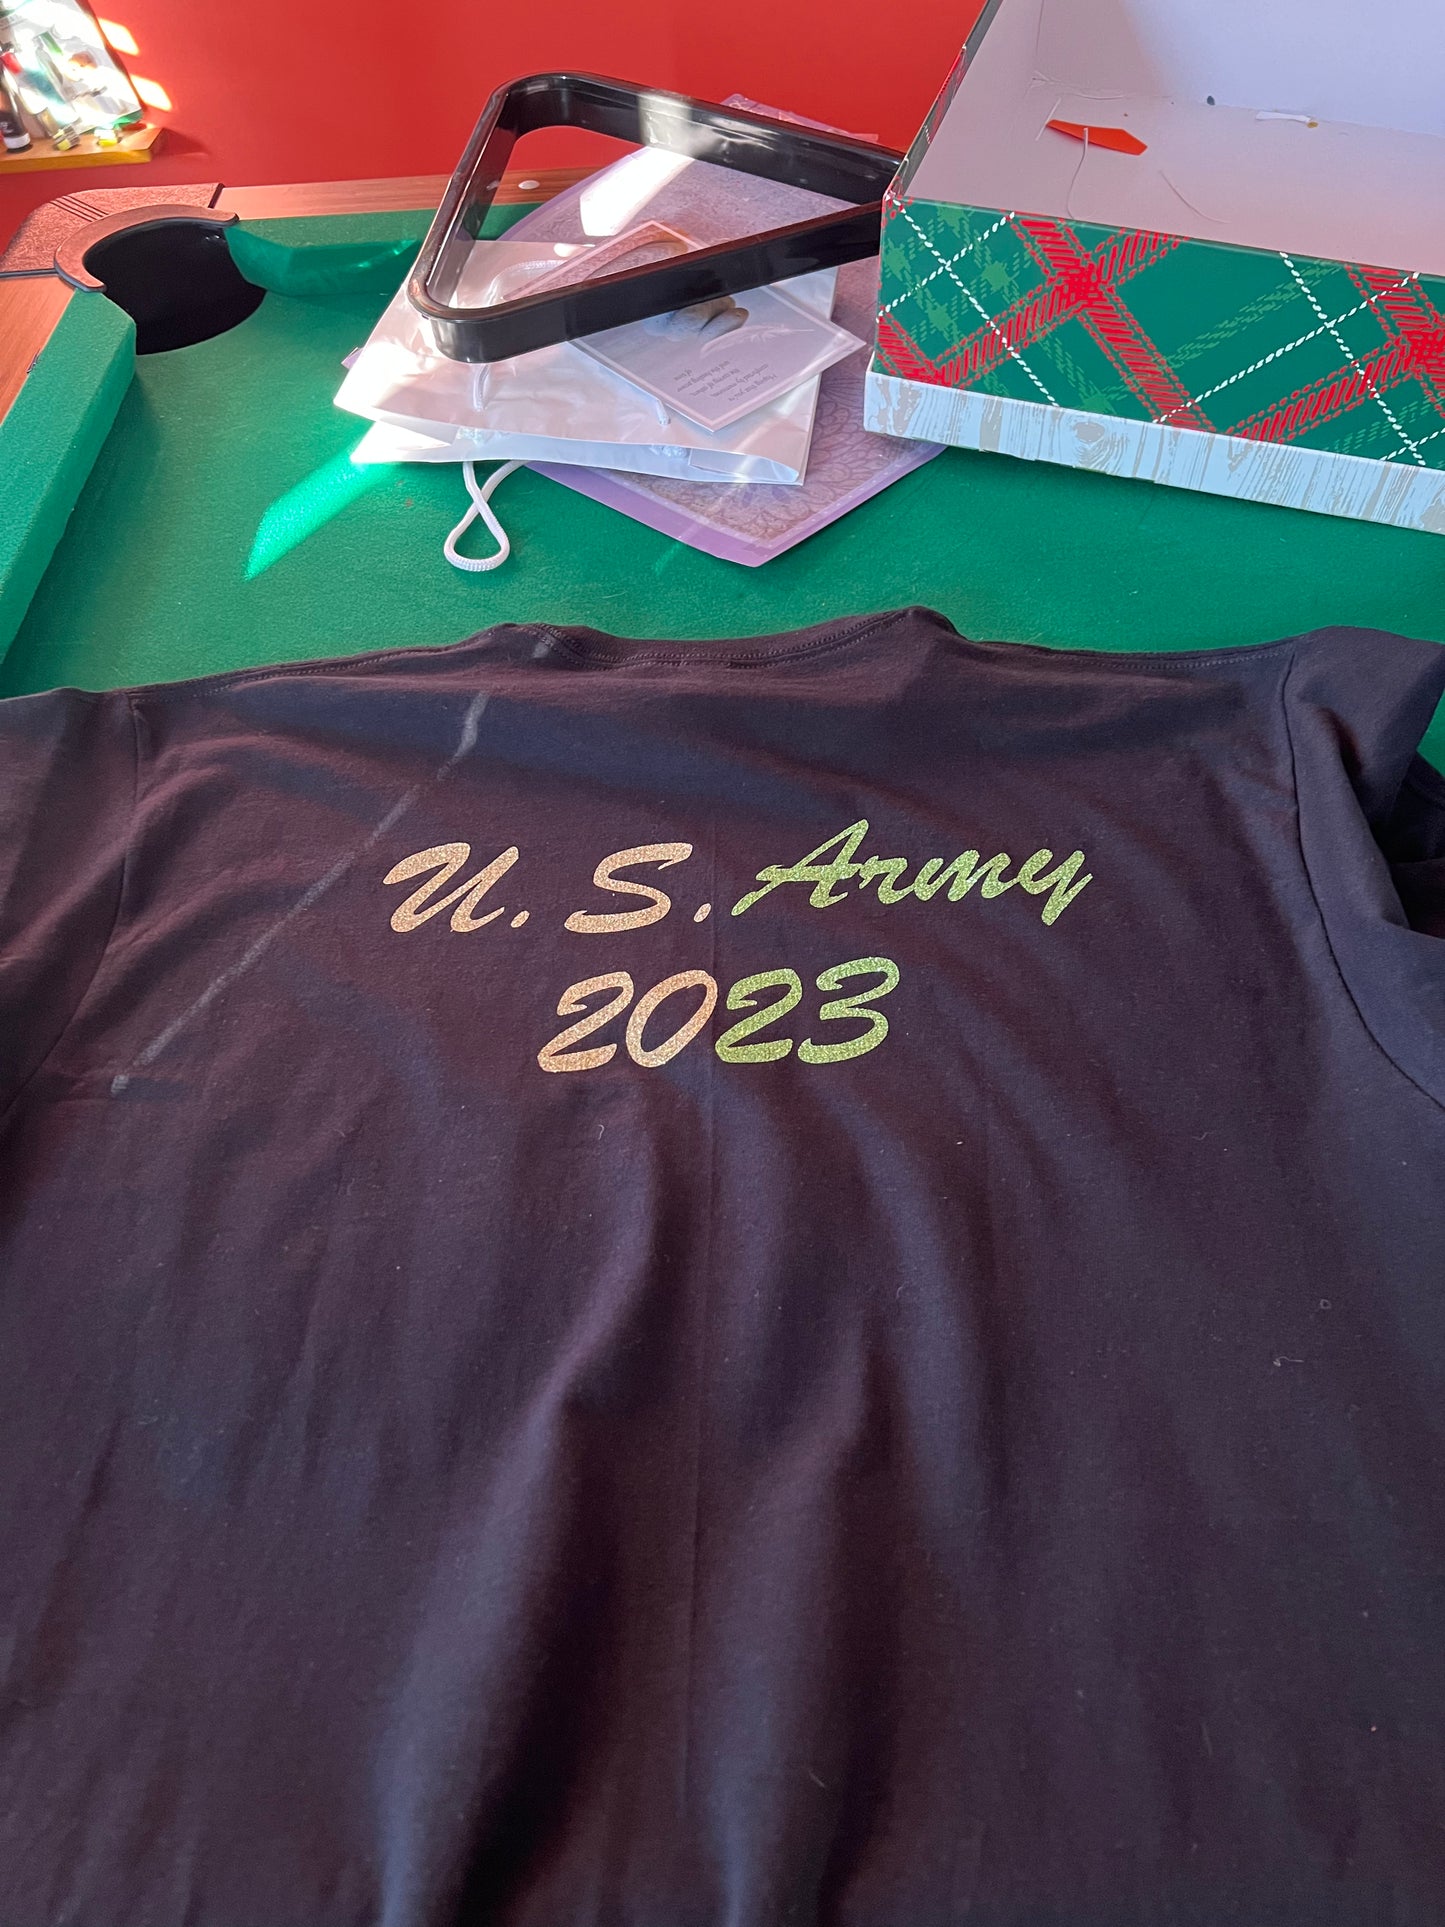 Officially Retired U.S Army 2023 Tees